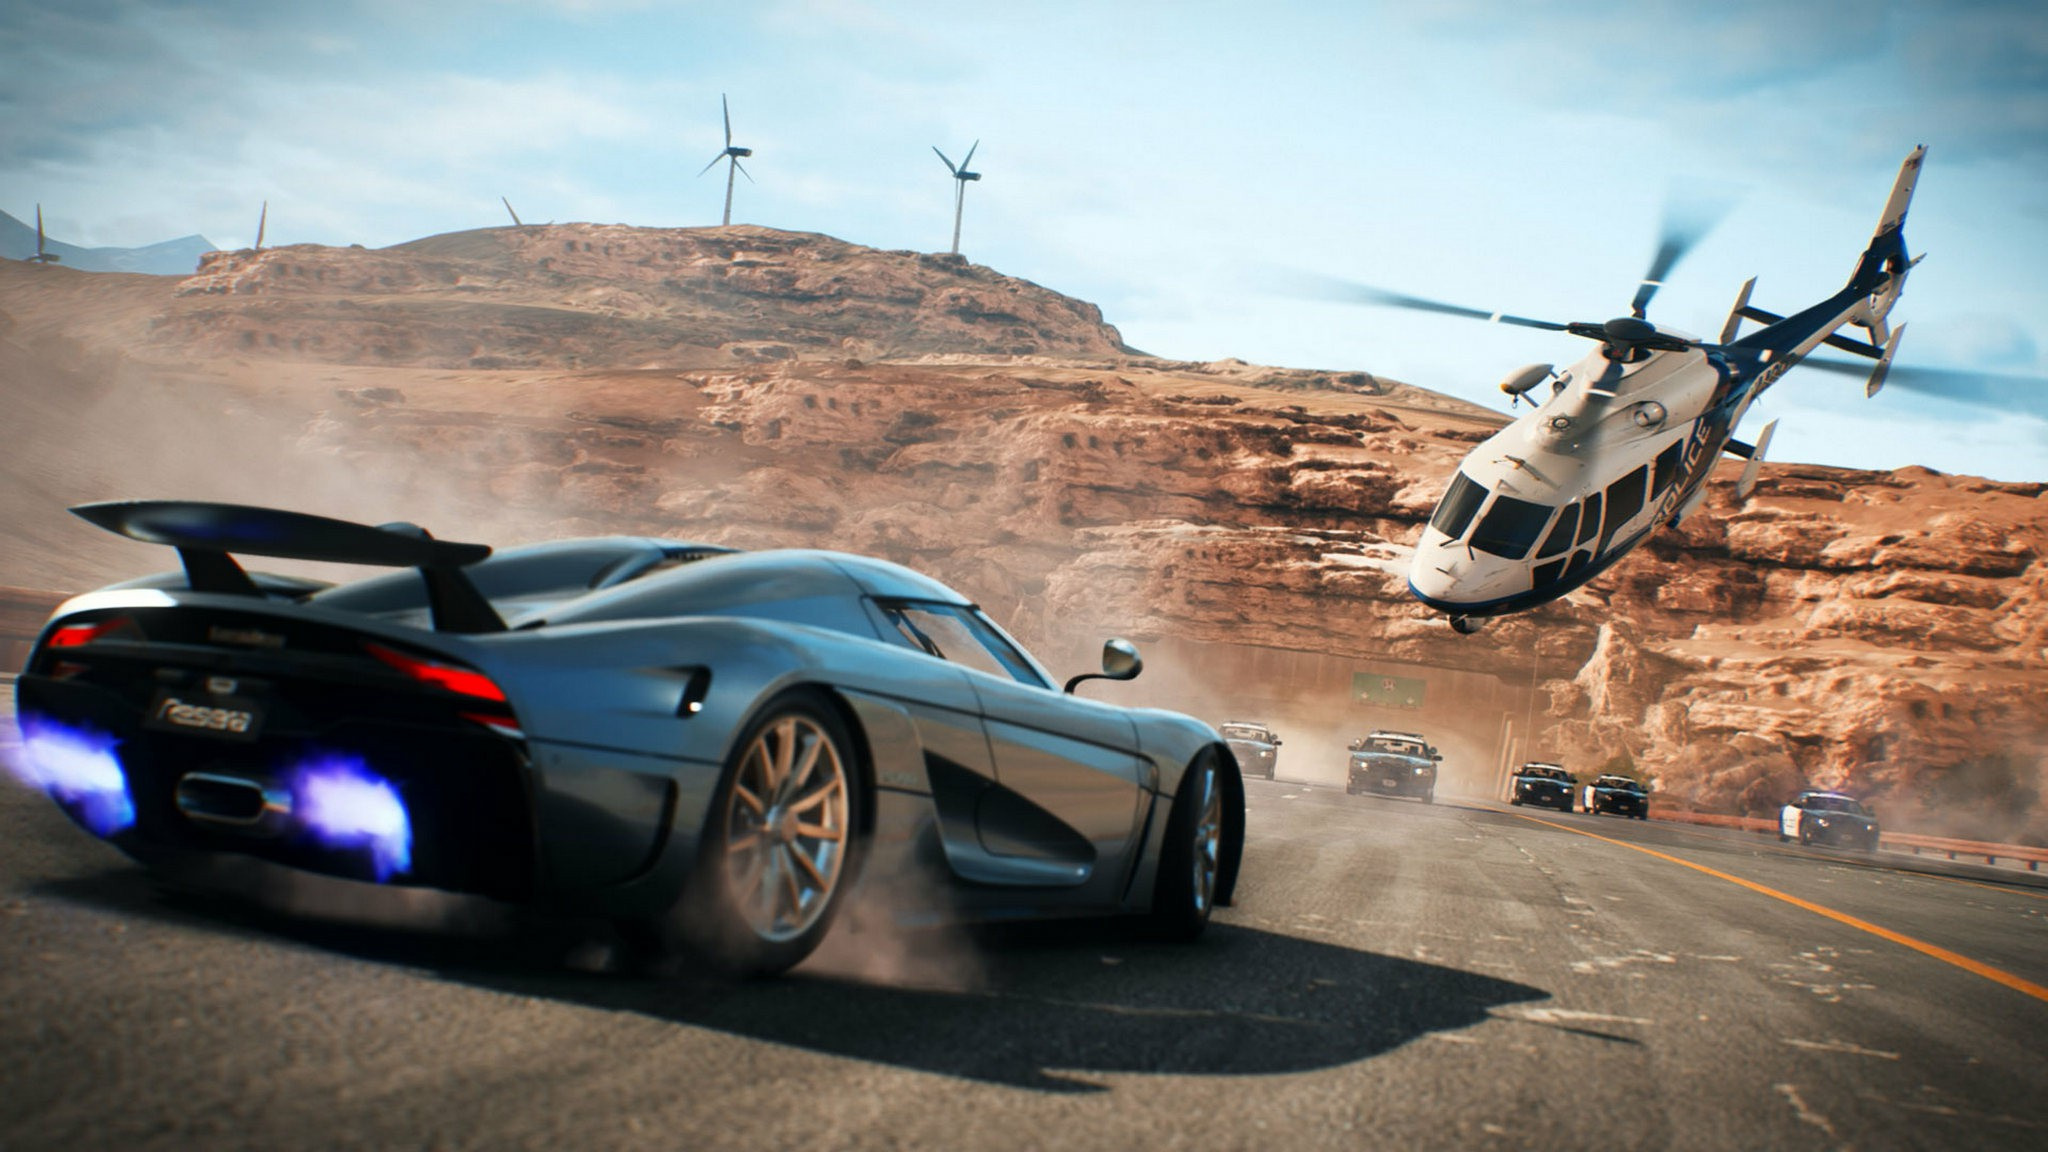 Need for speed playback. Игра need for Speed Payback. Need for Speed Payback пс4. Need for Speed Payback (ps4).